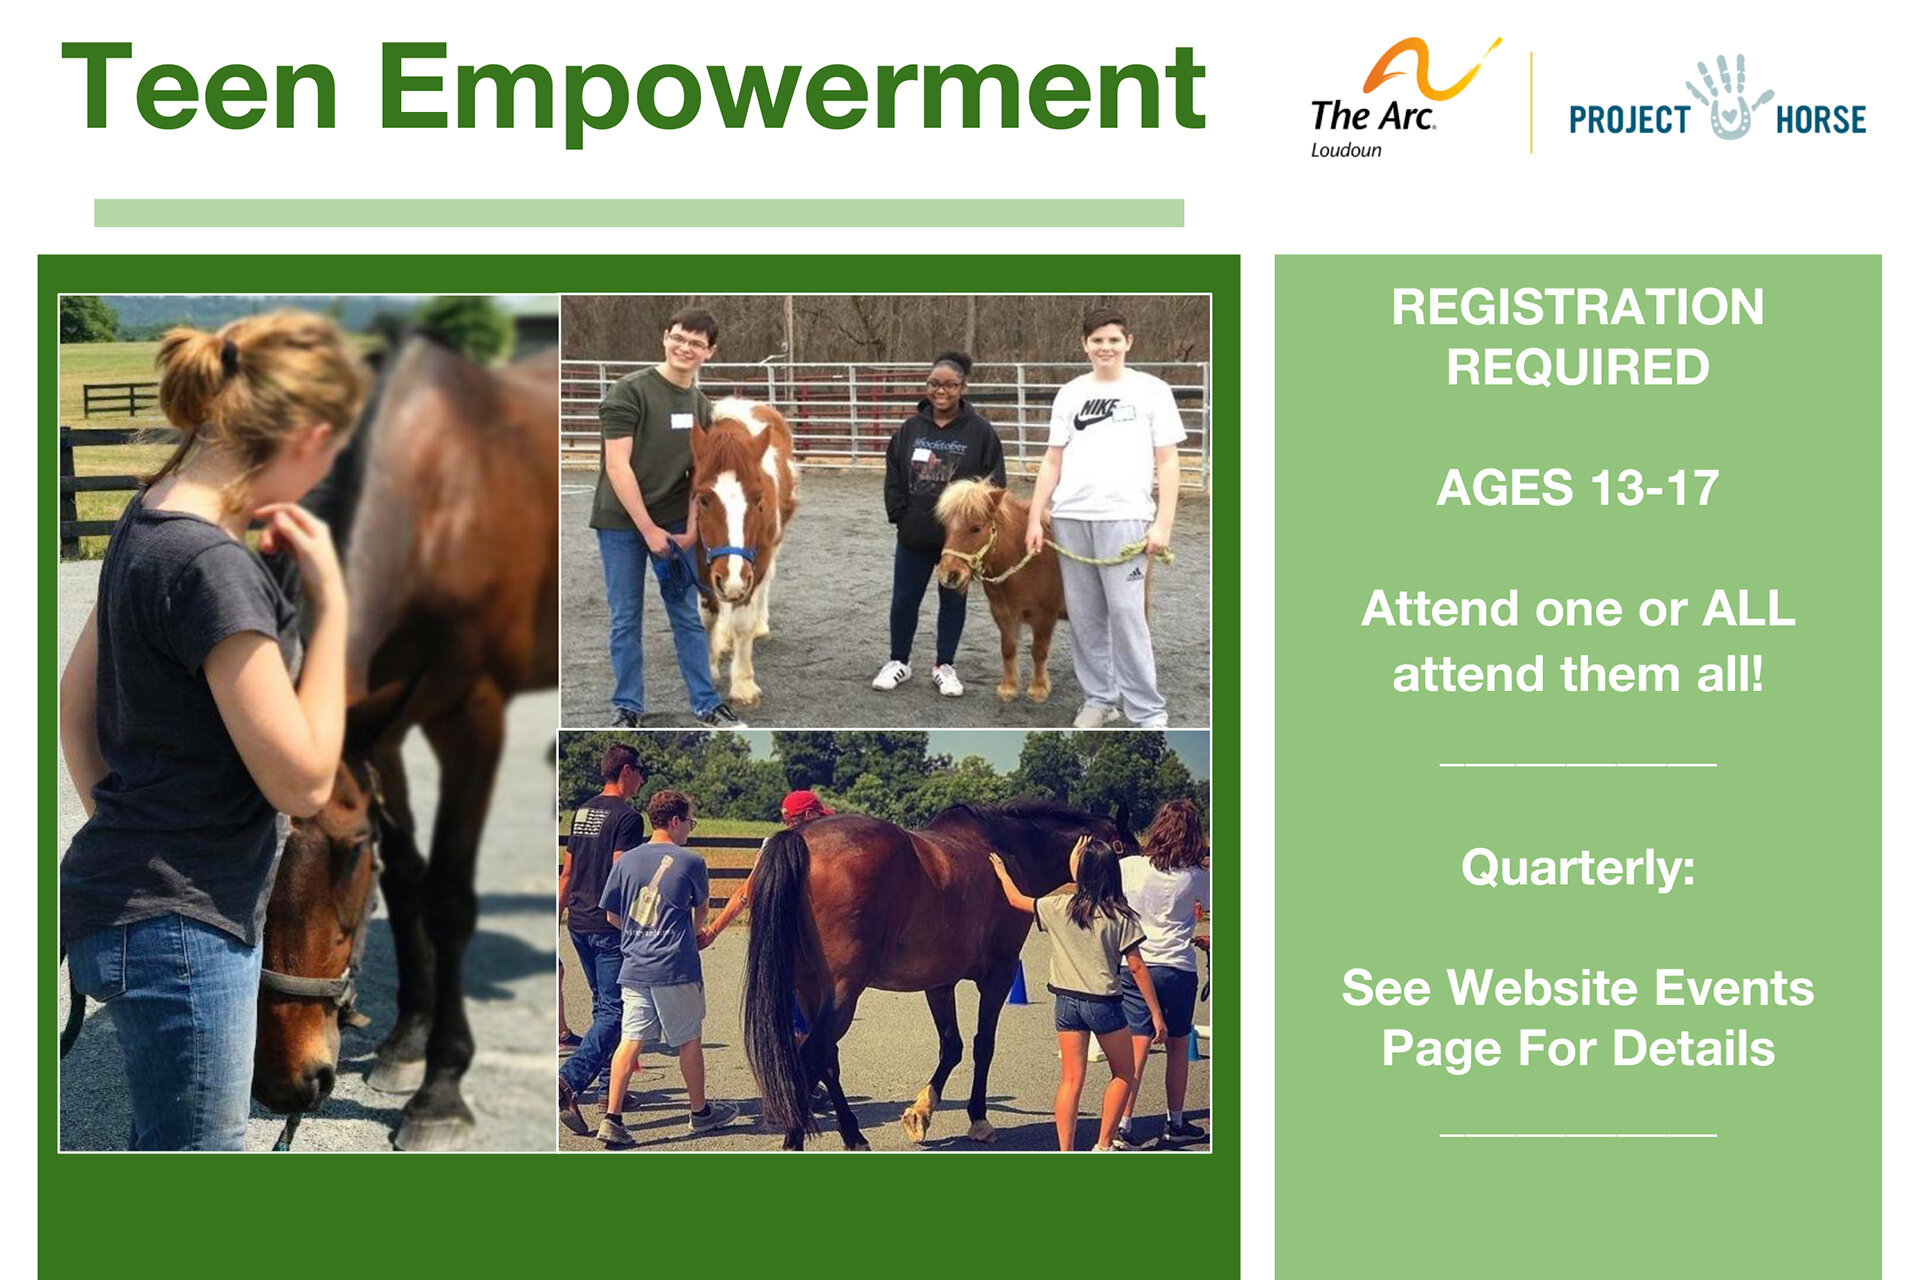 Join our 4-legged mentors and 2-legged staff for fun and helpful lessons on Sunday, Dec. 11! No horse experience is required! Each theme-focused workshop includes:

- Ground-based activities
- Hands-on horse time
- Lots of positive peer support
- Dis